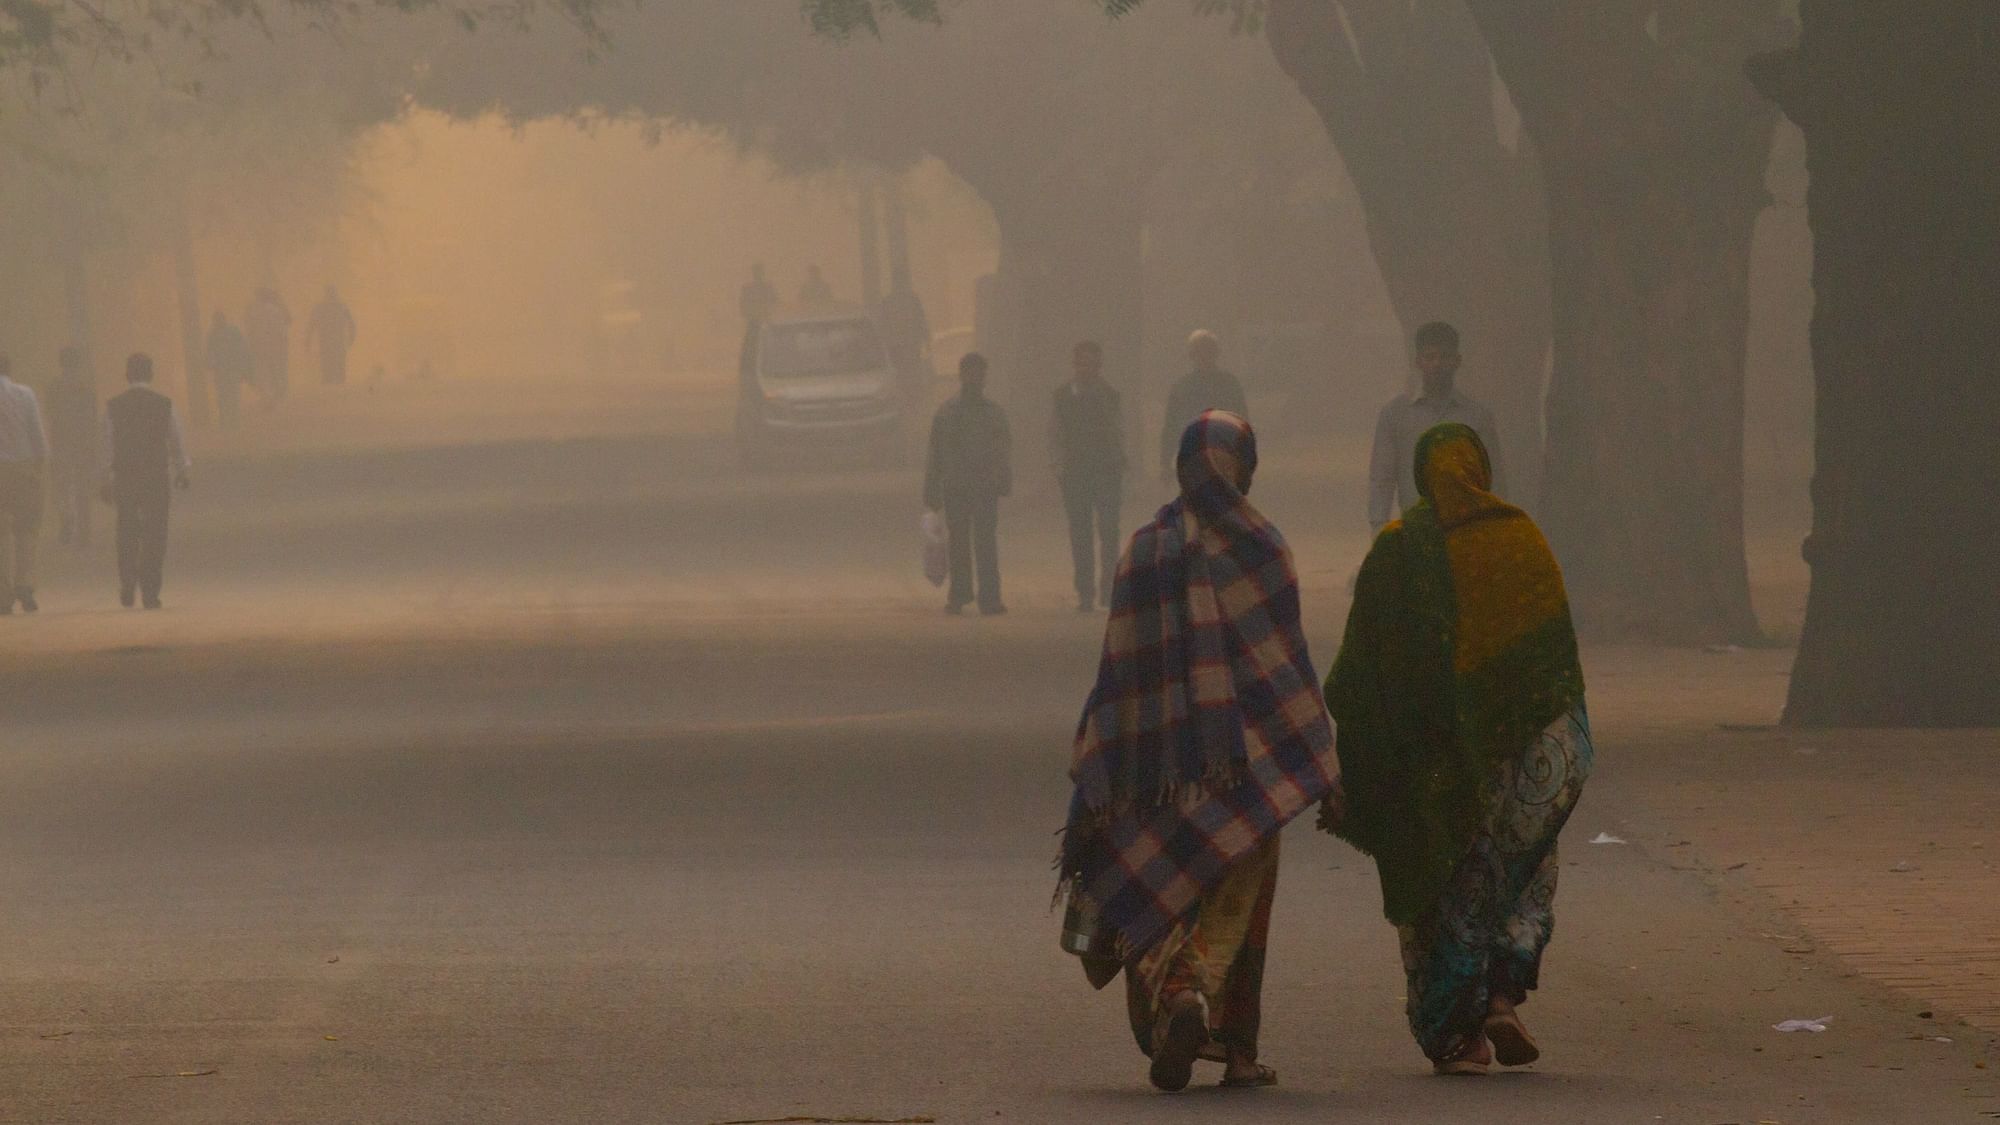 Globally, about 75 per cent of deaths attributed to air pollution occur in people aged over 60 years.